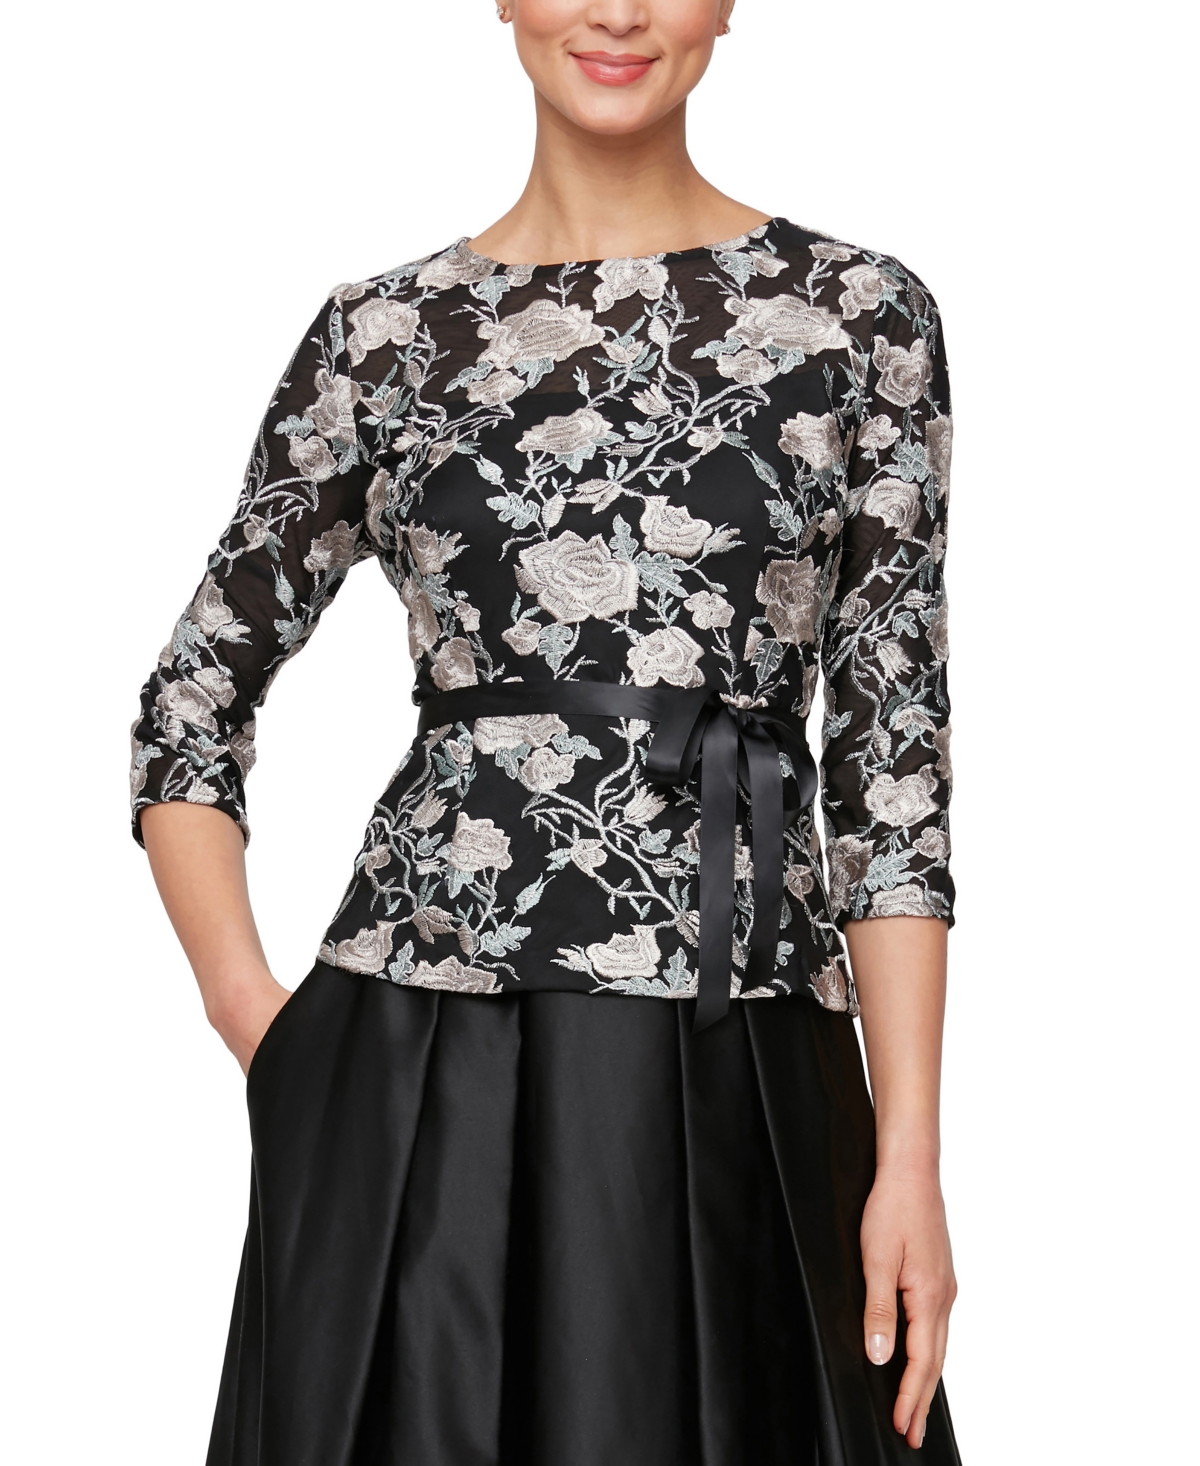 Women's Embroidered Floral Belted Blouse - Black Buff